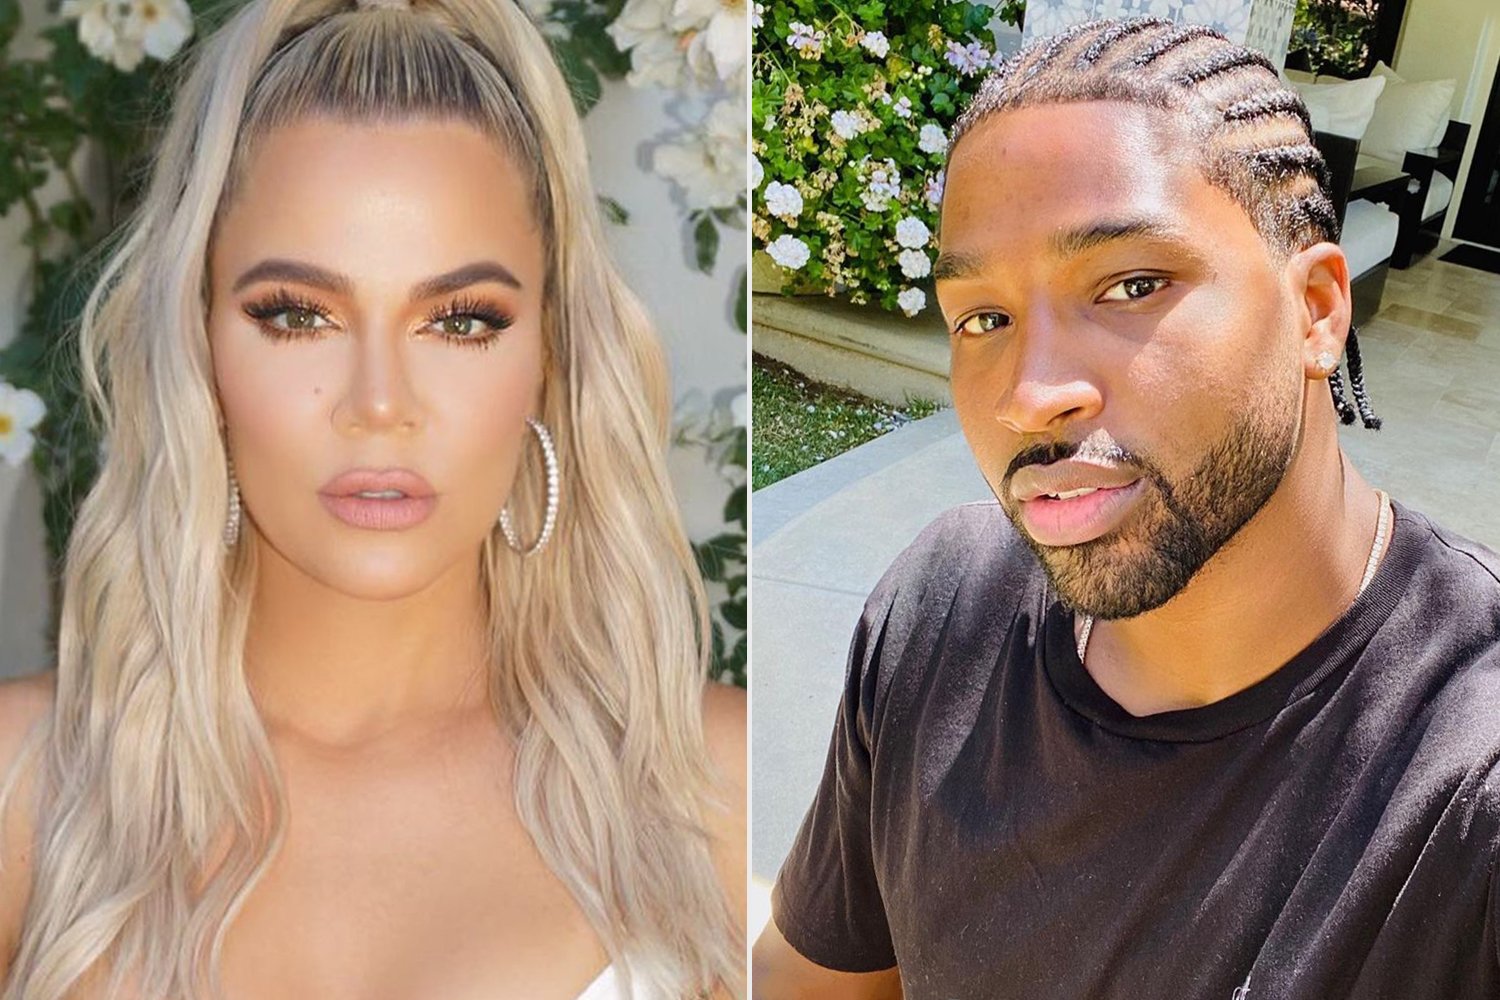 Tristan Thompson publicly apologizes to Khloé Kardashian after a DNA test showed he was the father of the child with his instructor